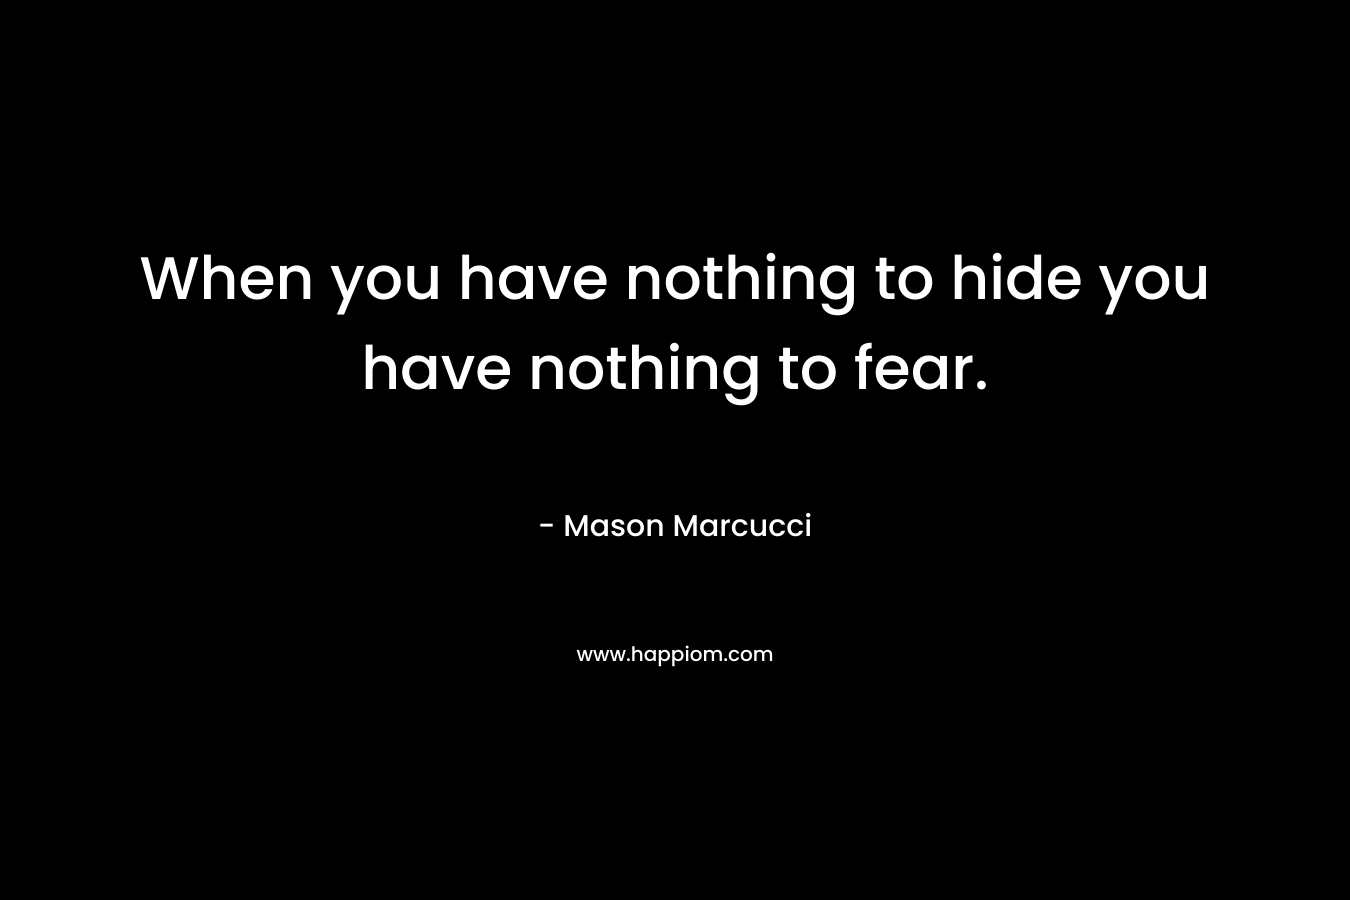 When you have nothing to hide you have nothing to fear.